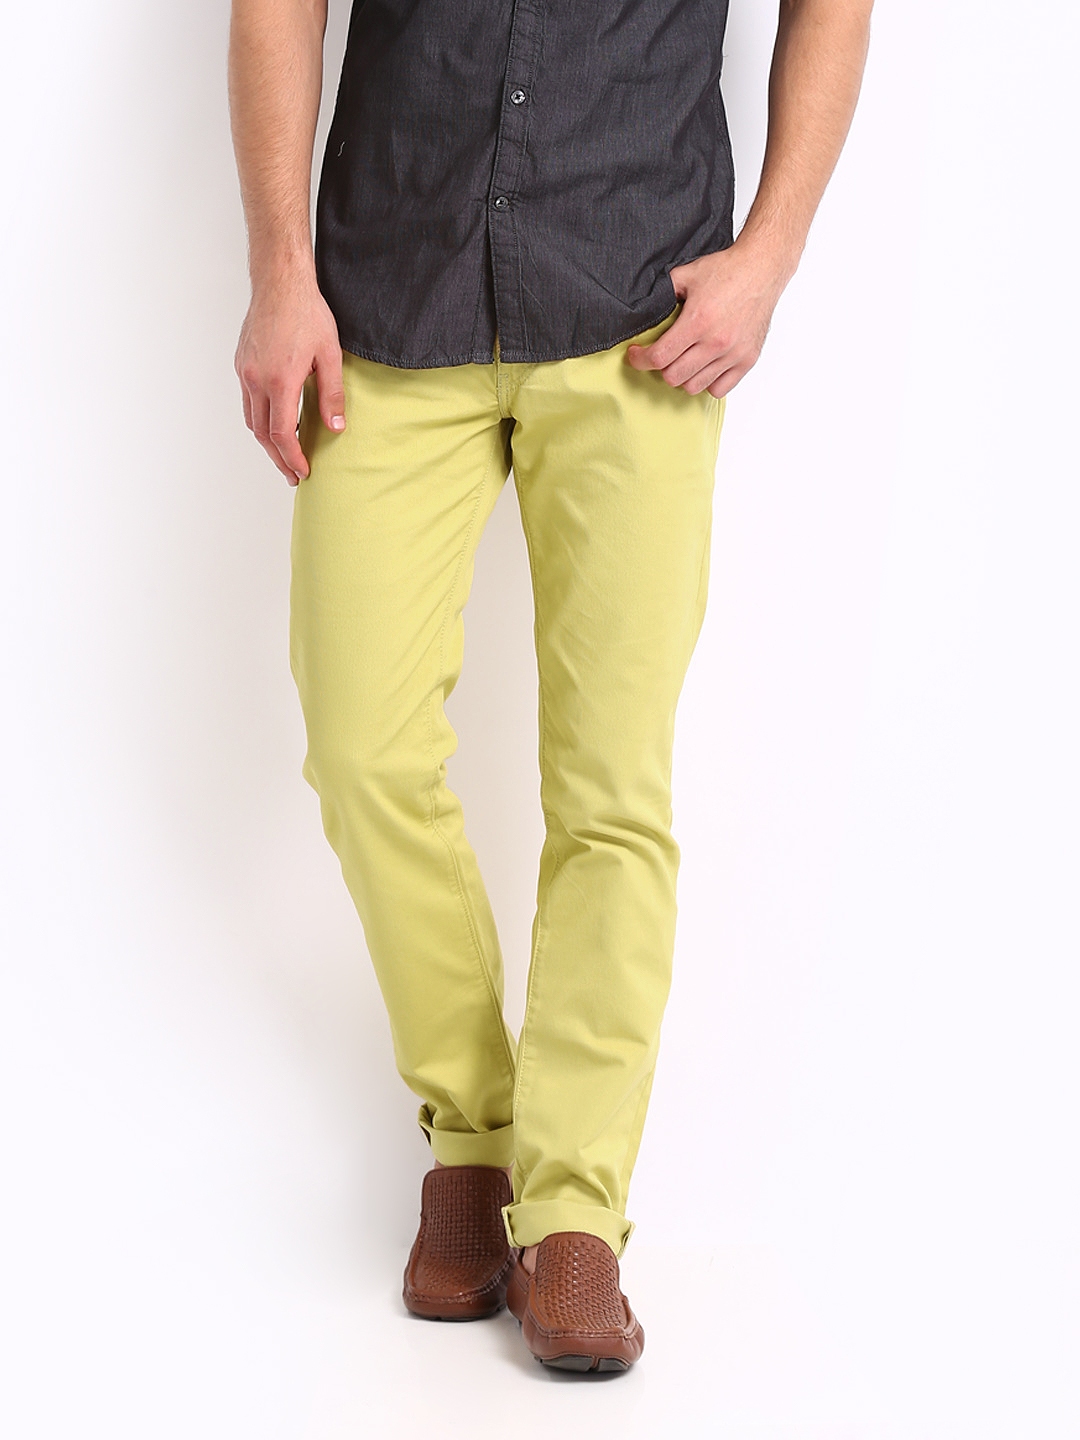 Mens Mustard Yellow Drill Jeans  Peter Christian